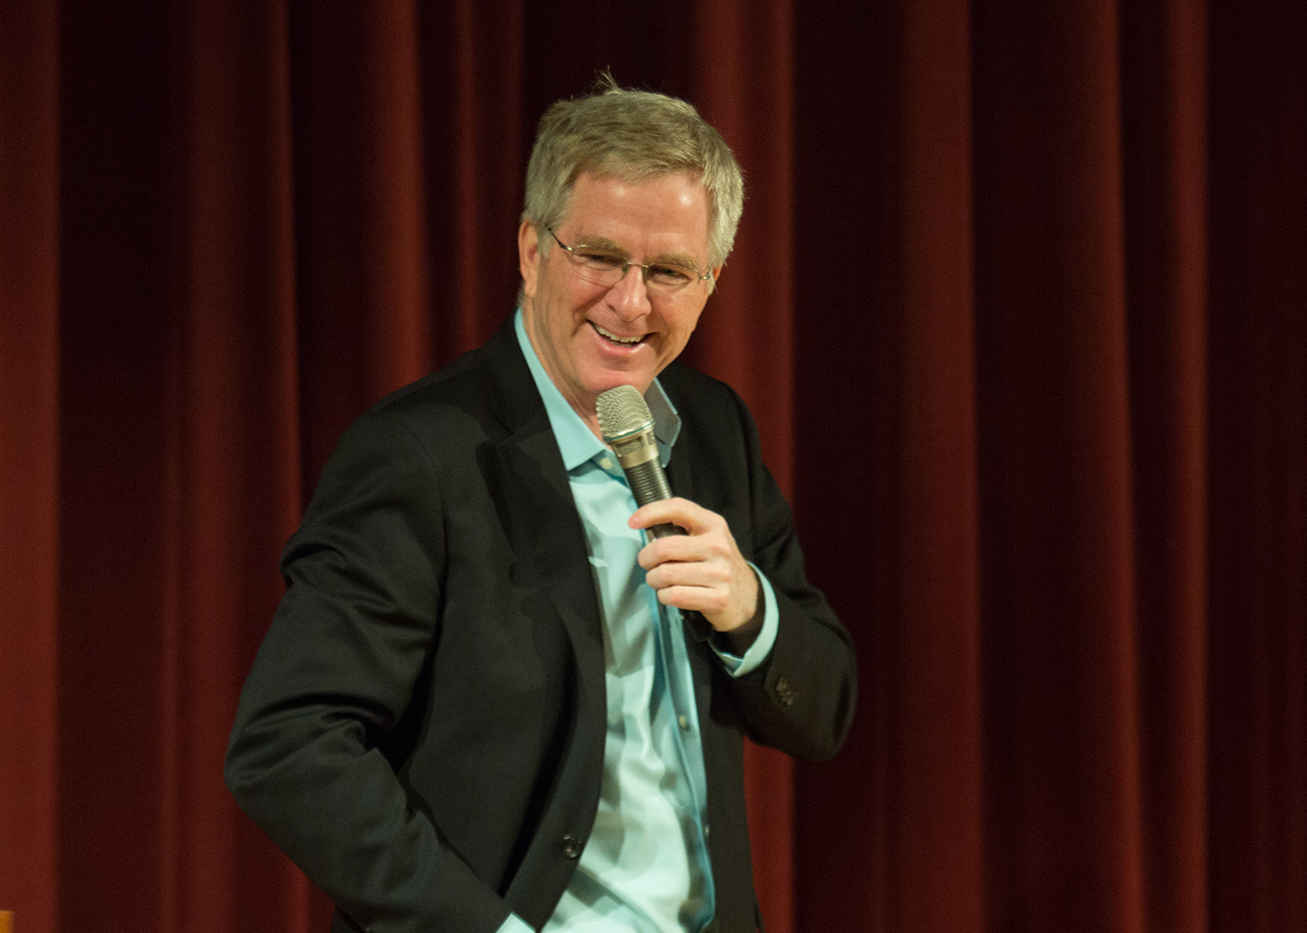 Rick Steves speaks with Lesley students in Marran Theater